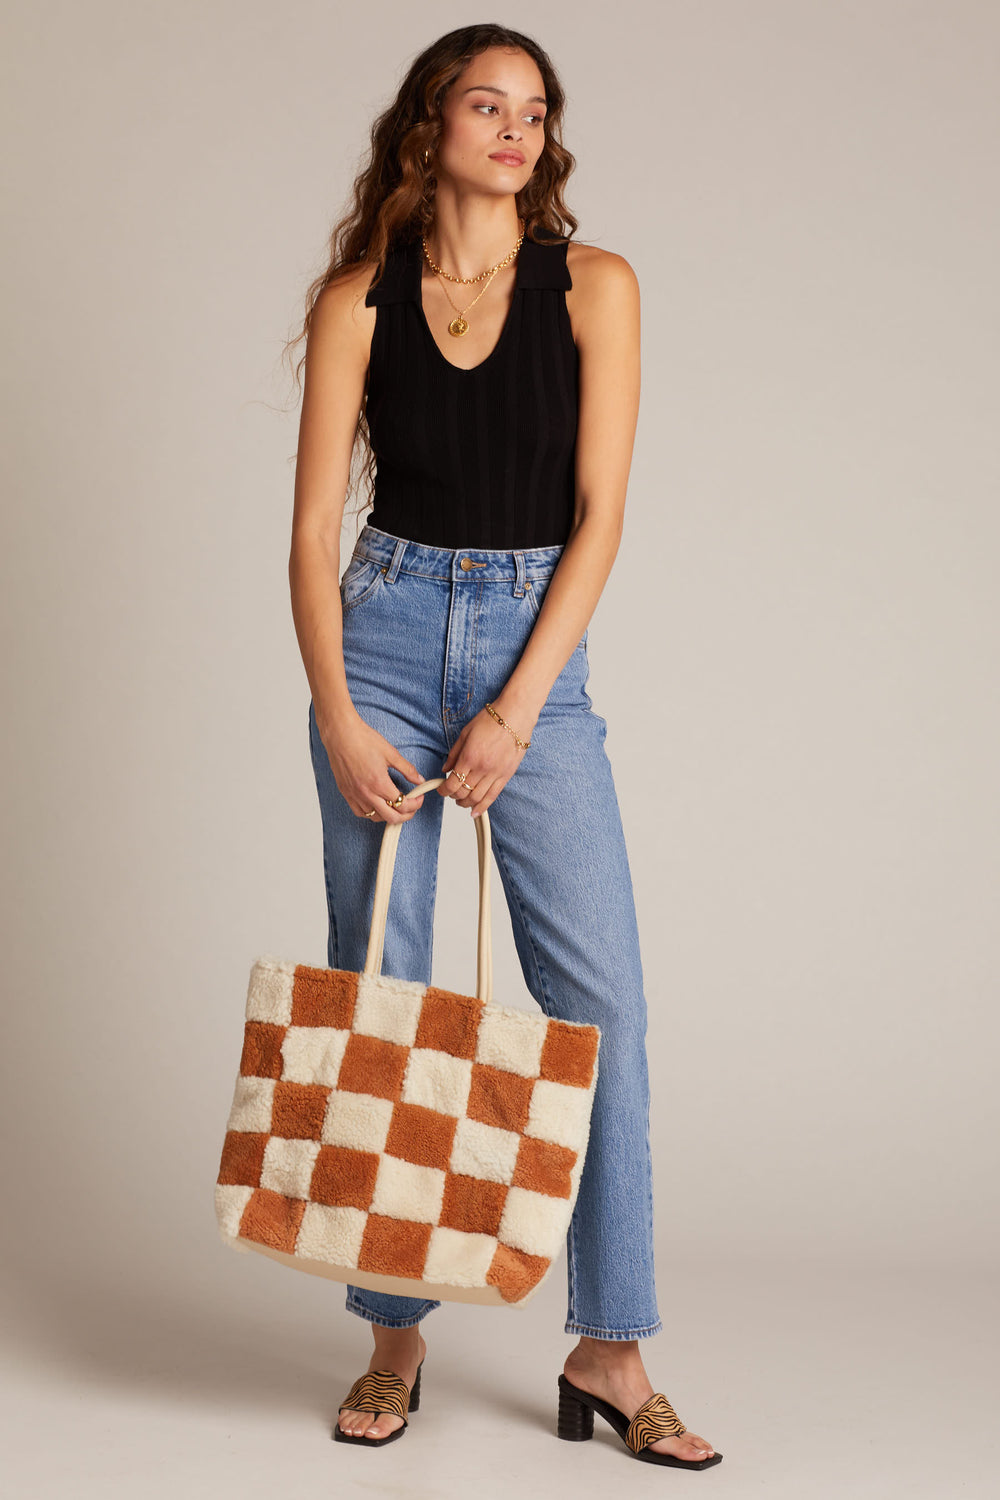 X Prism Cognac + White Checkered Patchwork Tote